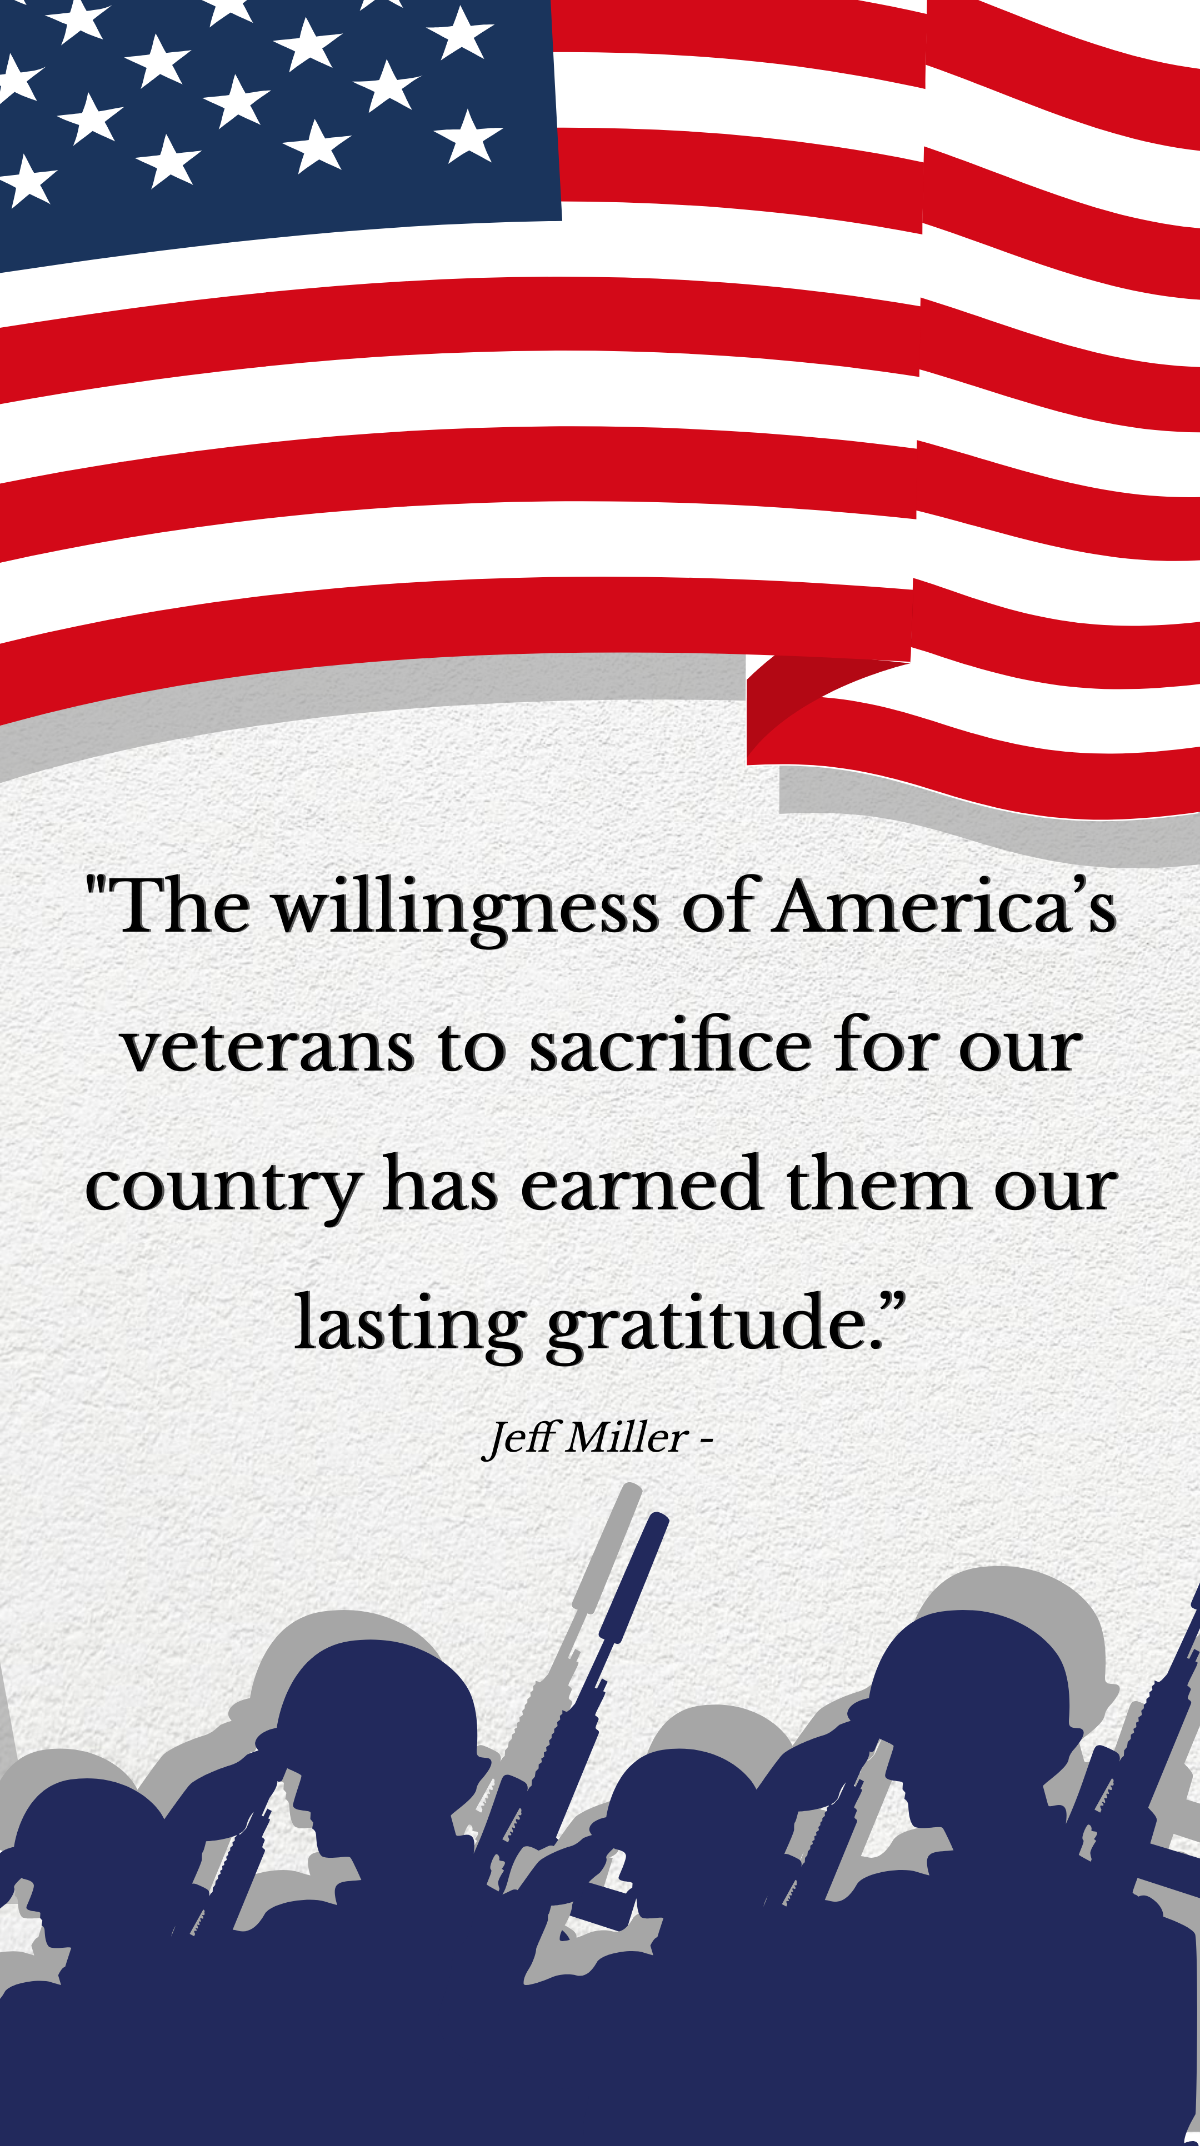 Jeff Miller - The willingness of America’s veterans to sacrifice for our country has earned them our lasting gratitude.” Template